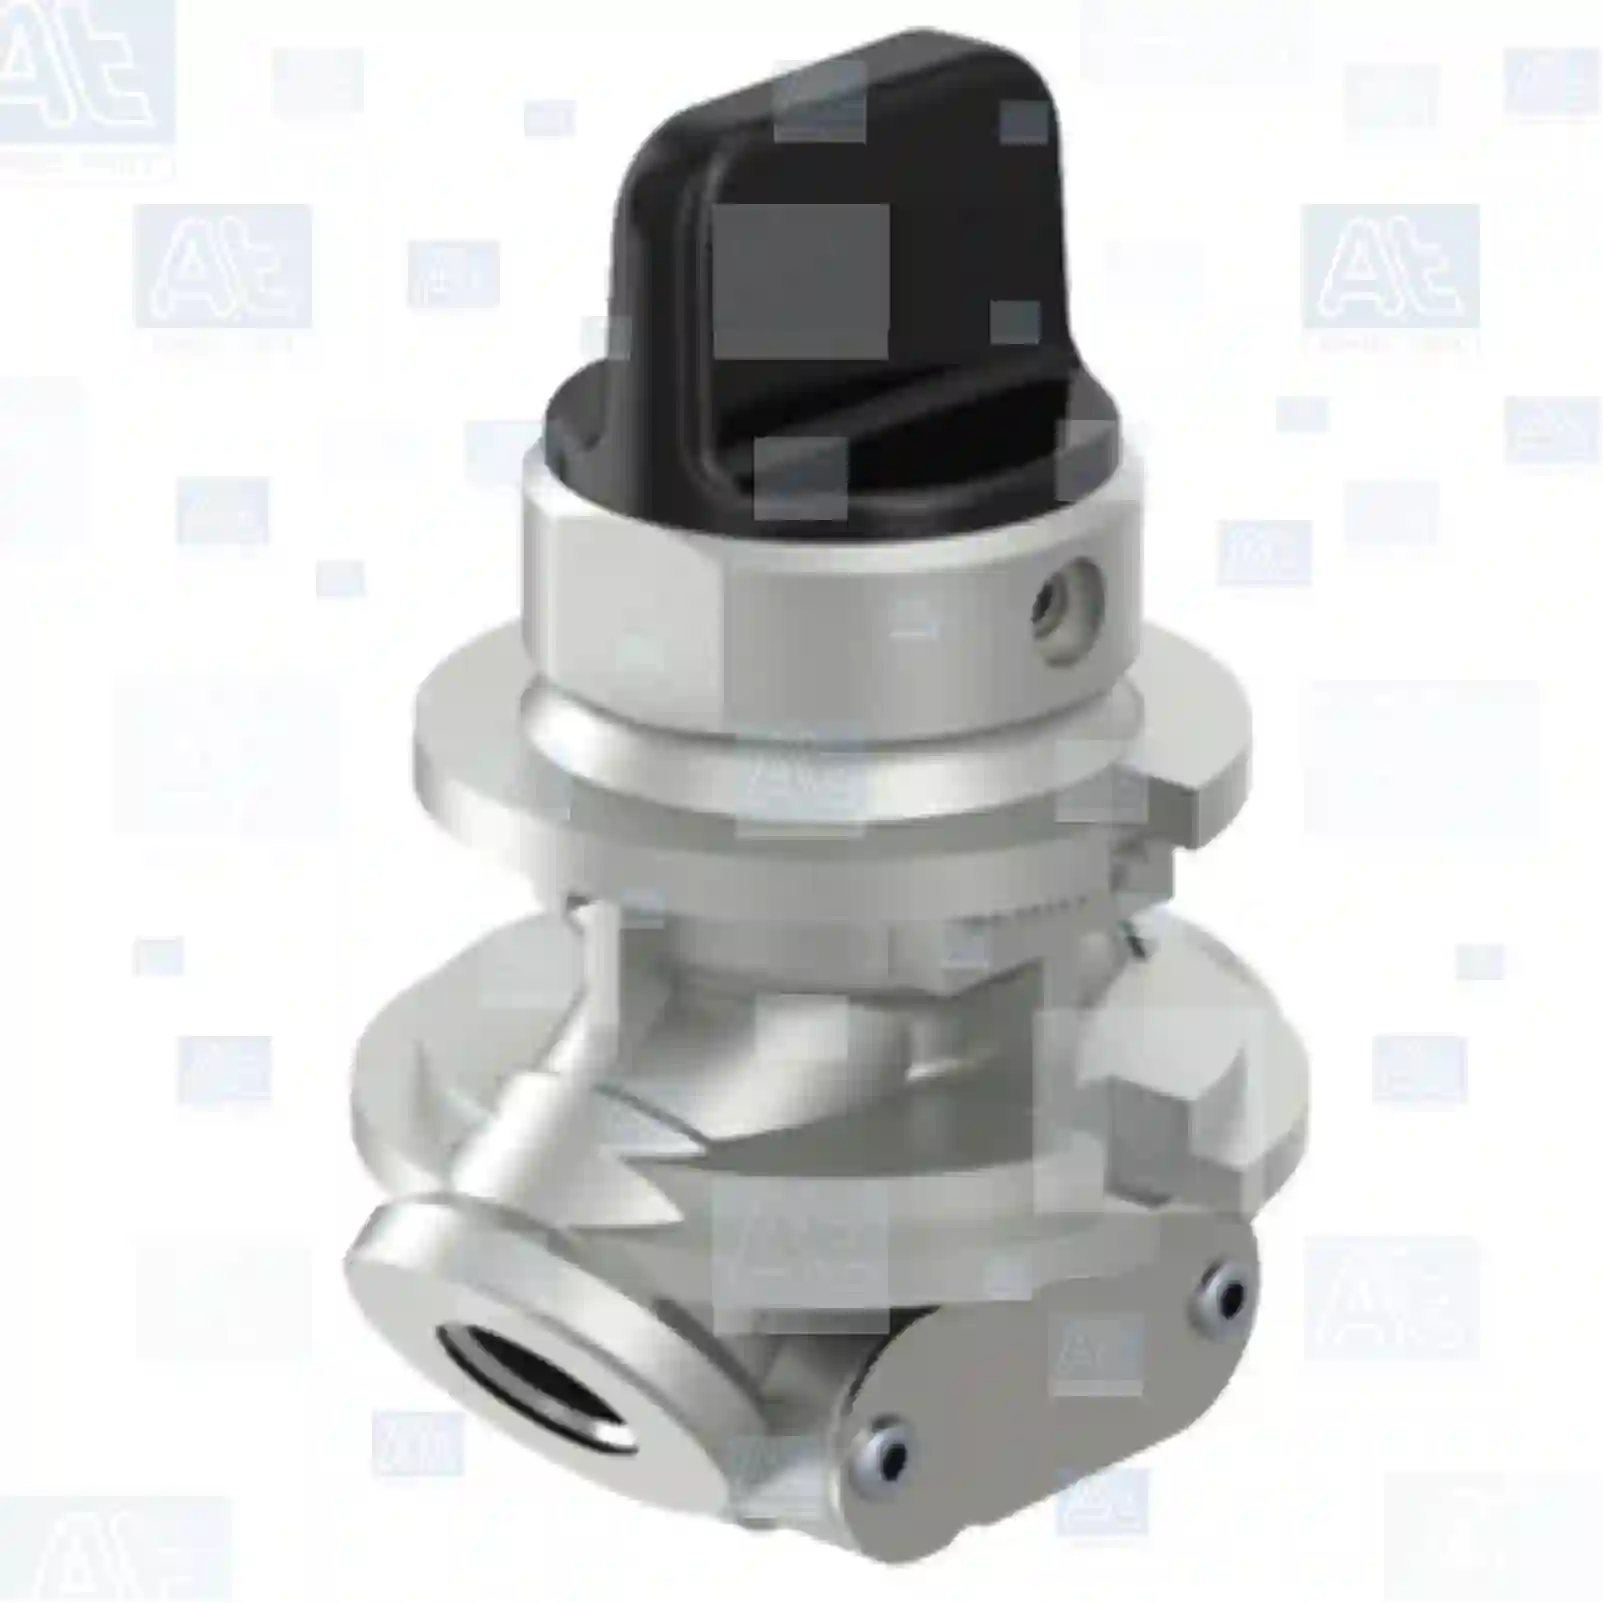 Valve, with nut, 77731943, 0243112800, 1505080, 2140302017, 42008943, 42009273, 71005255, 314907, 04630360000, 81521856015, 81521856016, 81521856017, 81521856022, 81521856023, 81521856025, 81521856046, 81521859023, 81521859046, 85500011586, 0019975036, 0019976136, 0019976136S, 0039975936, 0039976036, 4630360000, 4630360010, 5000806590, 1934917, 1934918 ||  77731943 At Spare Part | Engine, Accelerator Pedal, Camshaft, Connecting Rod, Crankcase, Crankshaft, Cylinder Head, Engine Suspension Mountings, Exhaust Manifold, Exhaust Gas Recirculation, Filter Kits, Flywheel Housing, General Overhaul Kits, Engine, Intake Manifold, Oil Cleaner, Oil Cooler, Oil Filter, Oil Pump, Oil Sump, Piston & Liner, Sensor & Switch, Timing Case, Turbocharger, Cooling System, Belt Tensioner, Coolant Filter, Coolant Pipe, Corrosion Prevention Agent, Drive, Expansion Tank, Fan, Intercooler, Monitors & Gauges, Radiator, Thermostat, V-Belt / Timing belt, Water Pump, Fuel System, Electronical Injector Unit, Feed Pump, Fuel Filter, cpl., Fuel Gauge Sender,  Fuel Line, Fuel Pump, Fuel Tank, Injection Line Kit, Injection Pump, Exhaust System, Clutch & Pedal, Gearbox, Propeller Shaft, Axles, Brake System, Hubs & Wheels, Suspension, Leaf Spring, Universal Parts / Accessories, Steering, Electrical System, Cabin Valve, with nut, 77731943, 0243112800, 1505080, 2140302017, 42008943, 42009273, 71005255, 314907, 04630360000, 81521856015, 81521856016, 81521856017, 81521856022, 81521856023, 81521856025, 81521856046, 81521859023, 81521859046, 85500011586, 0019975036, 0019976136, 0019976136S, 0039975936, 0039976036, 4630360000, 4630360010, 5000806590, 1934917, 1934918 ||  77731943 At Spare Part | Engine, Accelerator Pedal, Camshaft, Connecting Rod, Crankcase, Crankshaft, Cylinder Head, Engine Suspension Mountings, Exhaust Manifold, Exhaust Gas Recirculation, Filter Kits, Flywheel Housing, General Overhaul Kits, Engine, Intake Manifold, Oil Cleaner, Oil Cooler, Oil Filter, Oil Pump, Oil Sump, Piston & Liner, Sensor & Switch, Timing Case, Turbocharger, Cooling System, Belt Tensioner, Coolant Filter, Coolant Pipe, Corrosion Prevention Agent, Drive, Expansion Tank, Fan, Intercooler, Monitors & Gauges, Radiator, Thermostat, V-Belt / Timing belt, Water Pump, Fuel System, Electronical Injector Unit, Feed Pump, Fuel Filter, cpl., Fuel Gauge Sender,  Fuel Line, Fuel Pump, Fuel Tank, Injection Line Kit, Injection Pump, Exhaust System, Clutch & Pedal, Gearbox, Propeller Shaft, Axles, Brake System, Hubs & Wheels, Suspension, Leaf Spring, Universal Parts / Accessories, Steering, Electrical System, Cabin